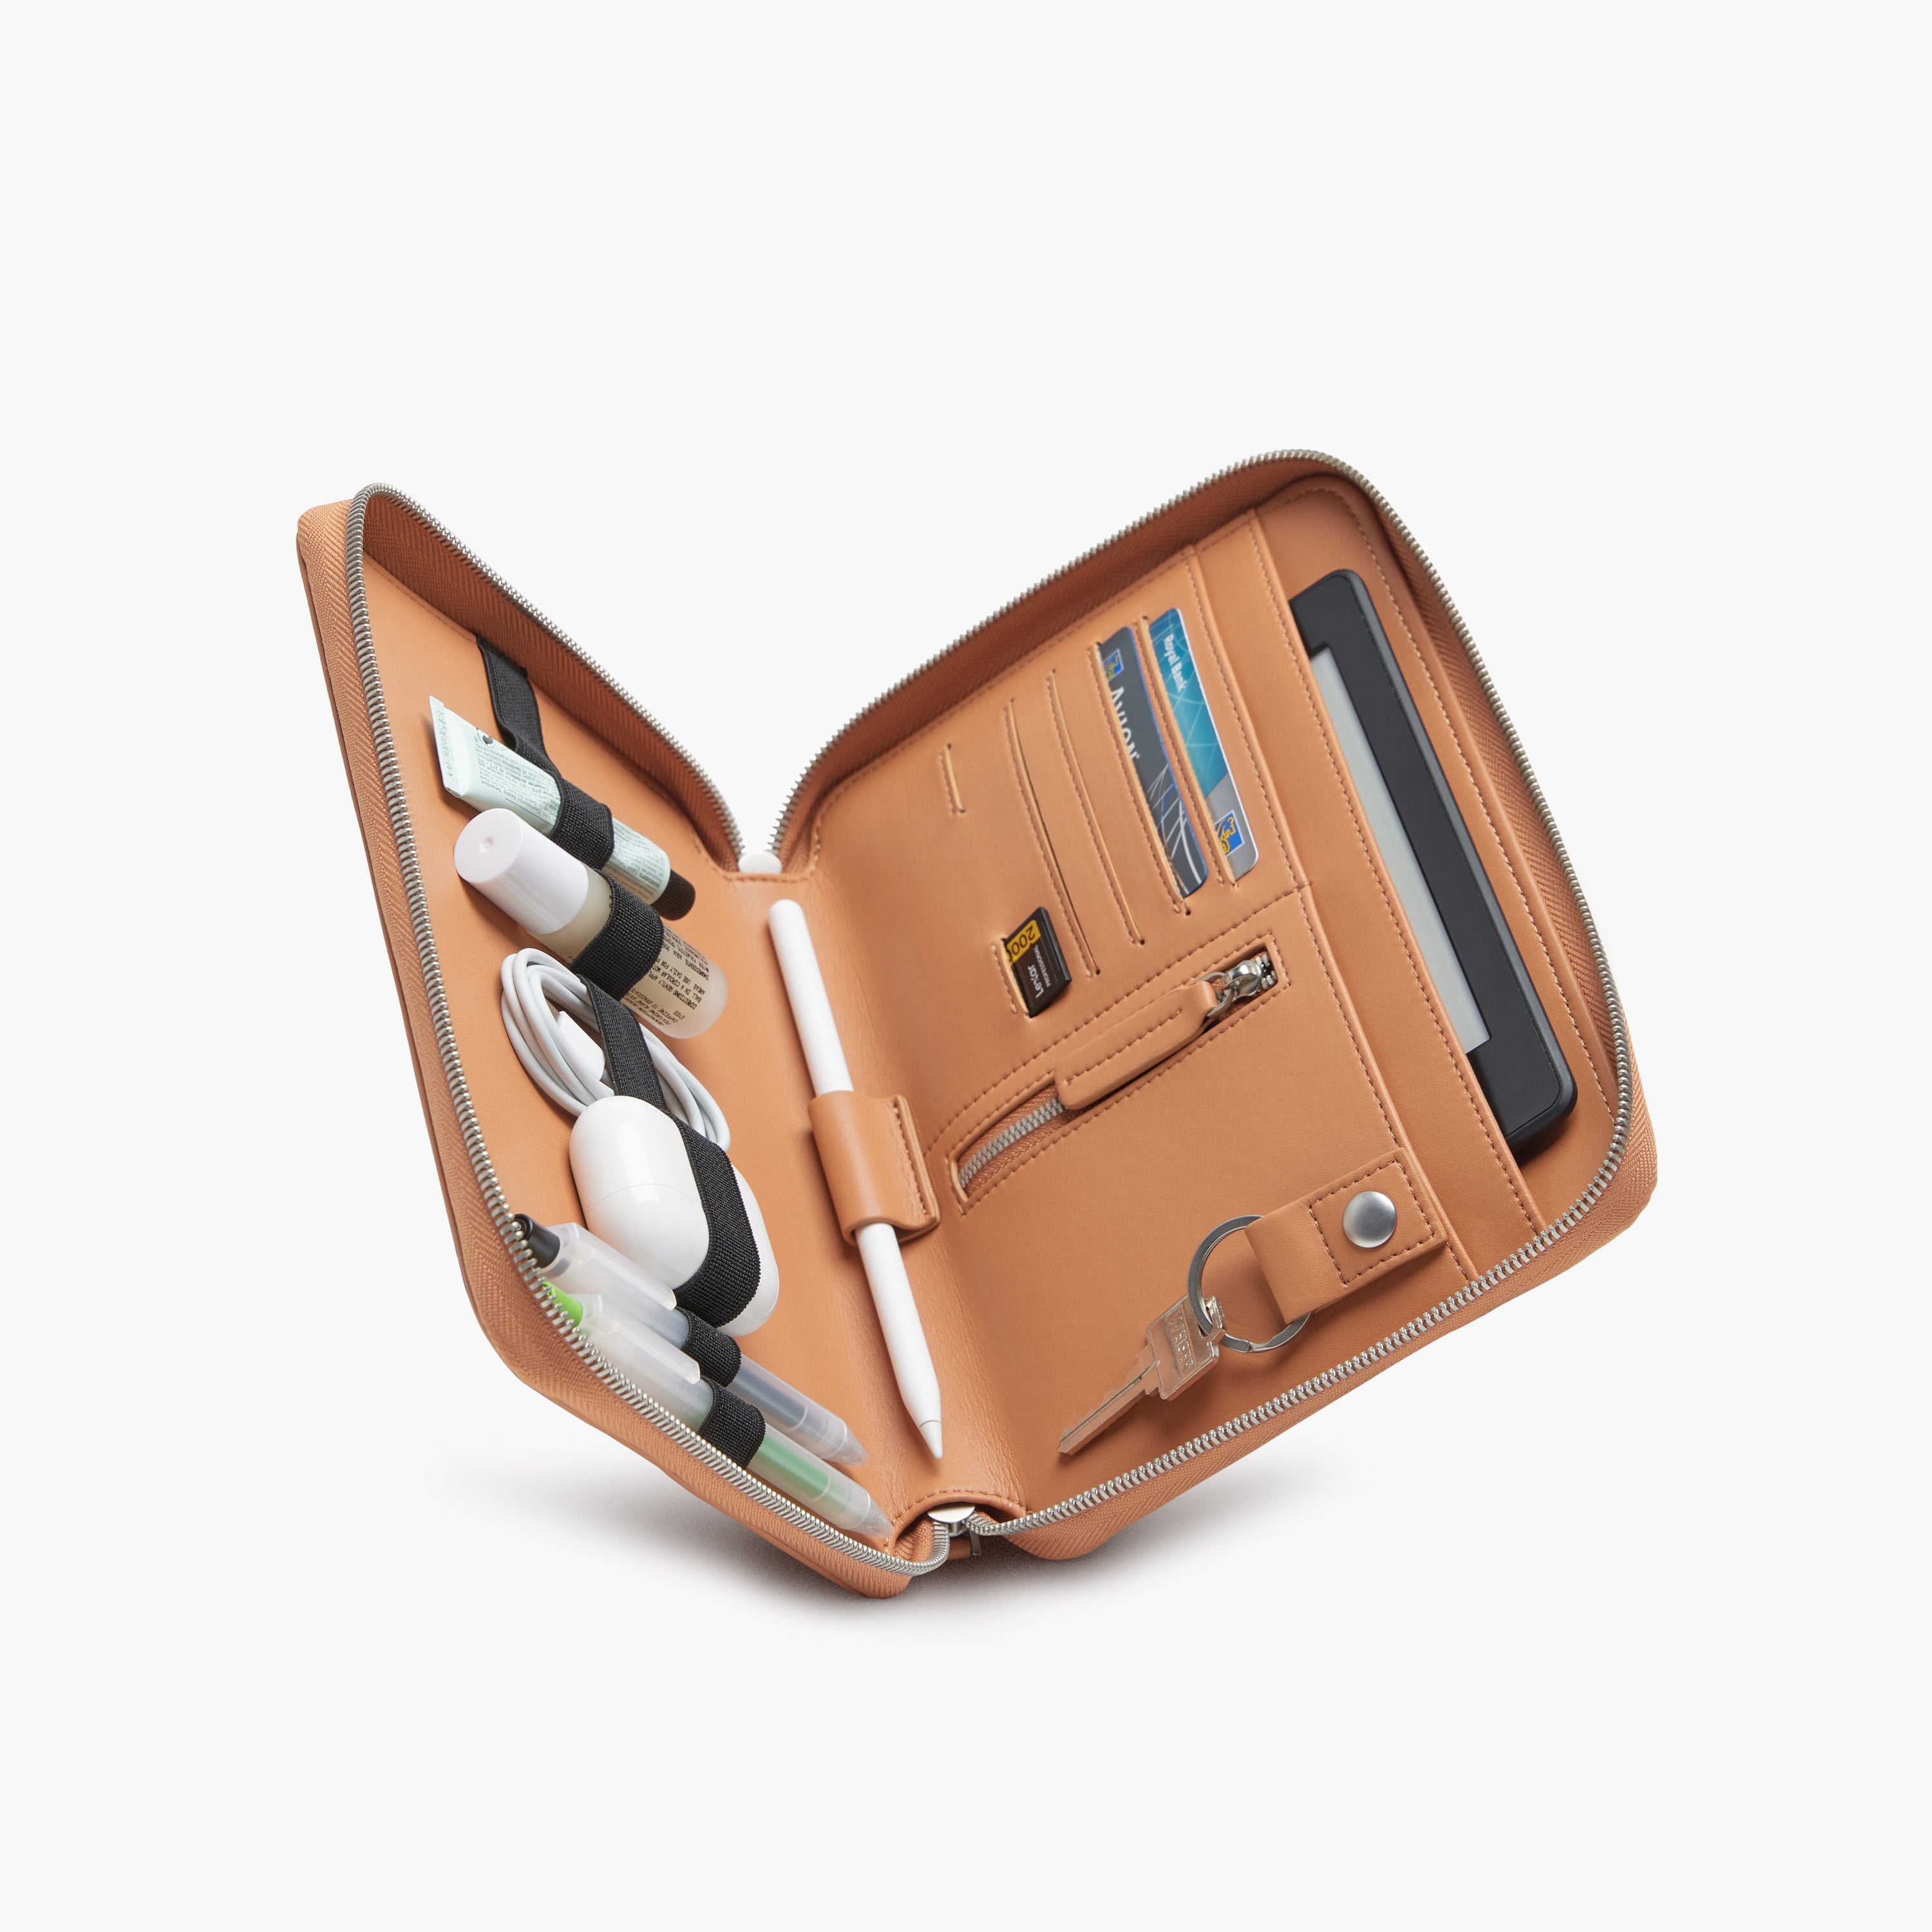 tan leather folio kit with holder for passport and e-reader